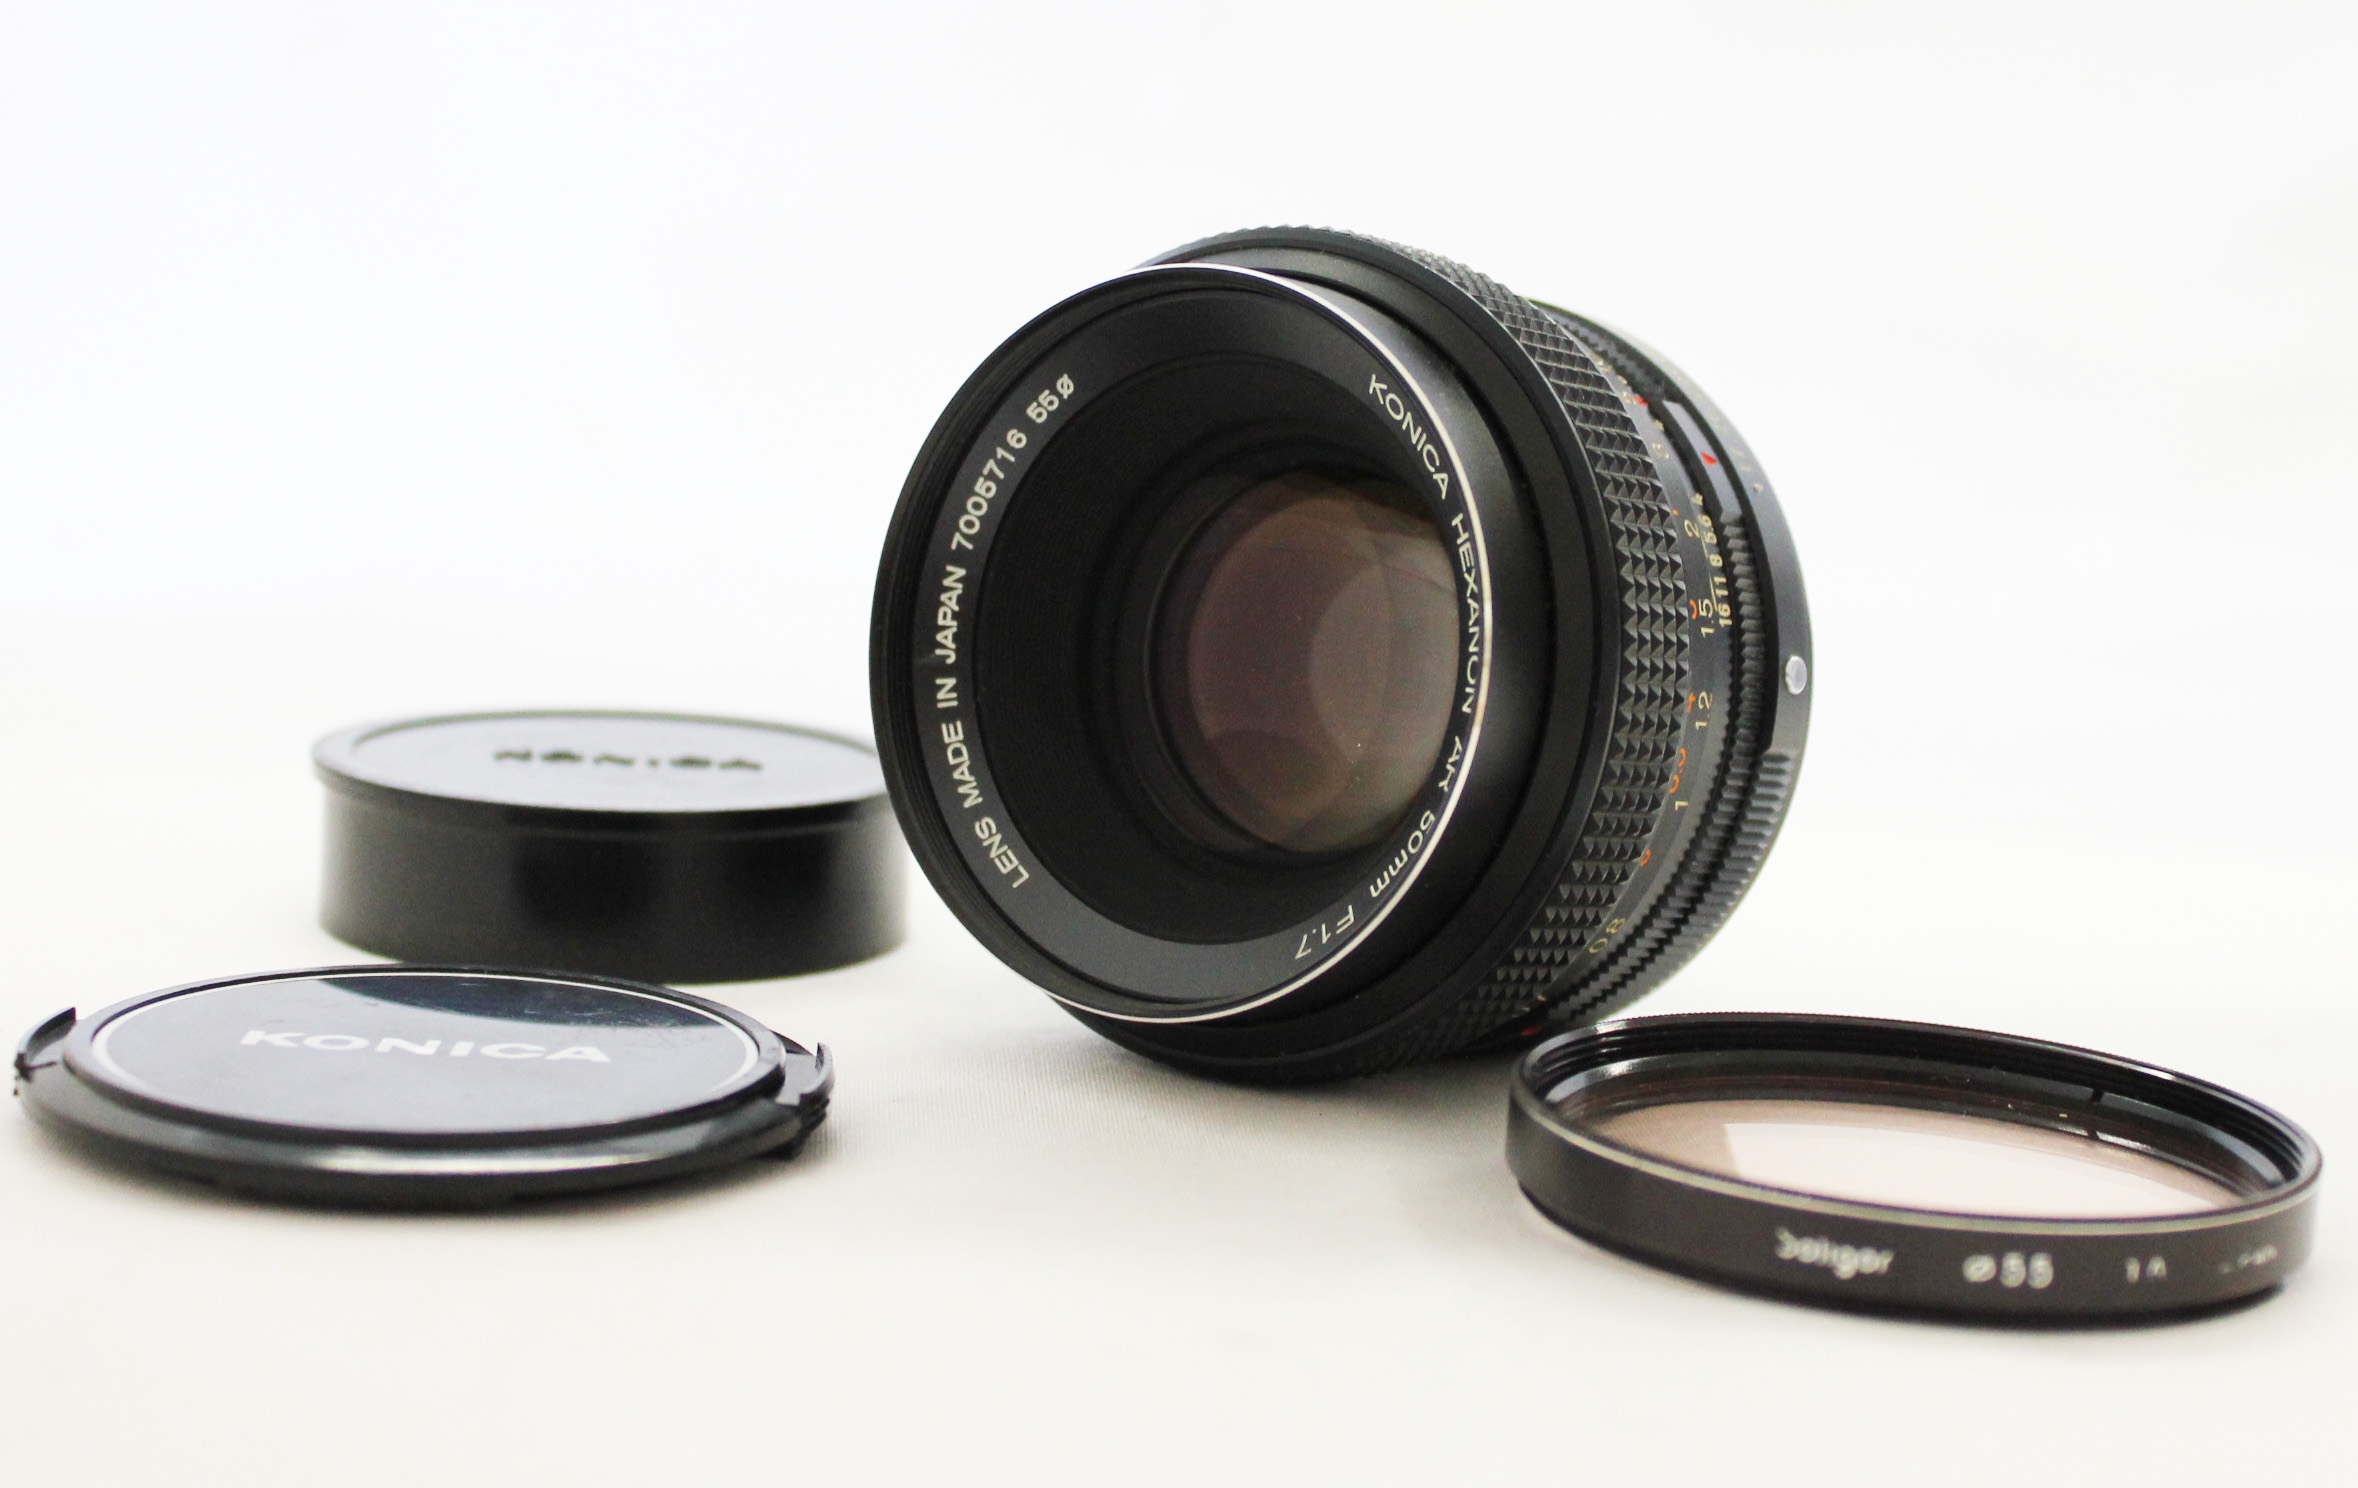 Japan Used Camera Shop | [Near Mint] Konica Hexanon AR 50mm F/1.7 Lens from Japan